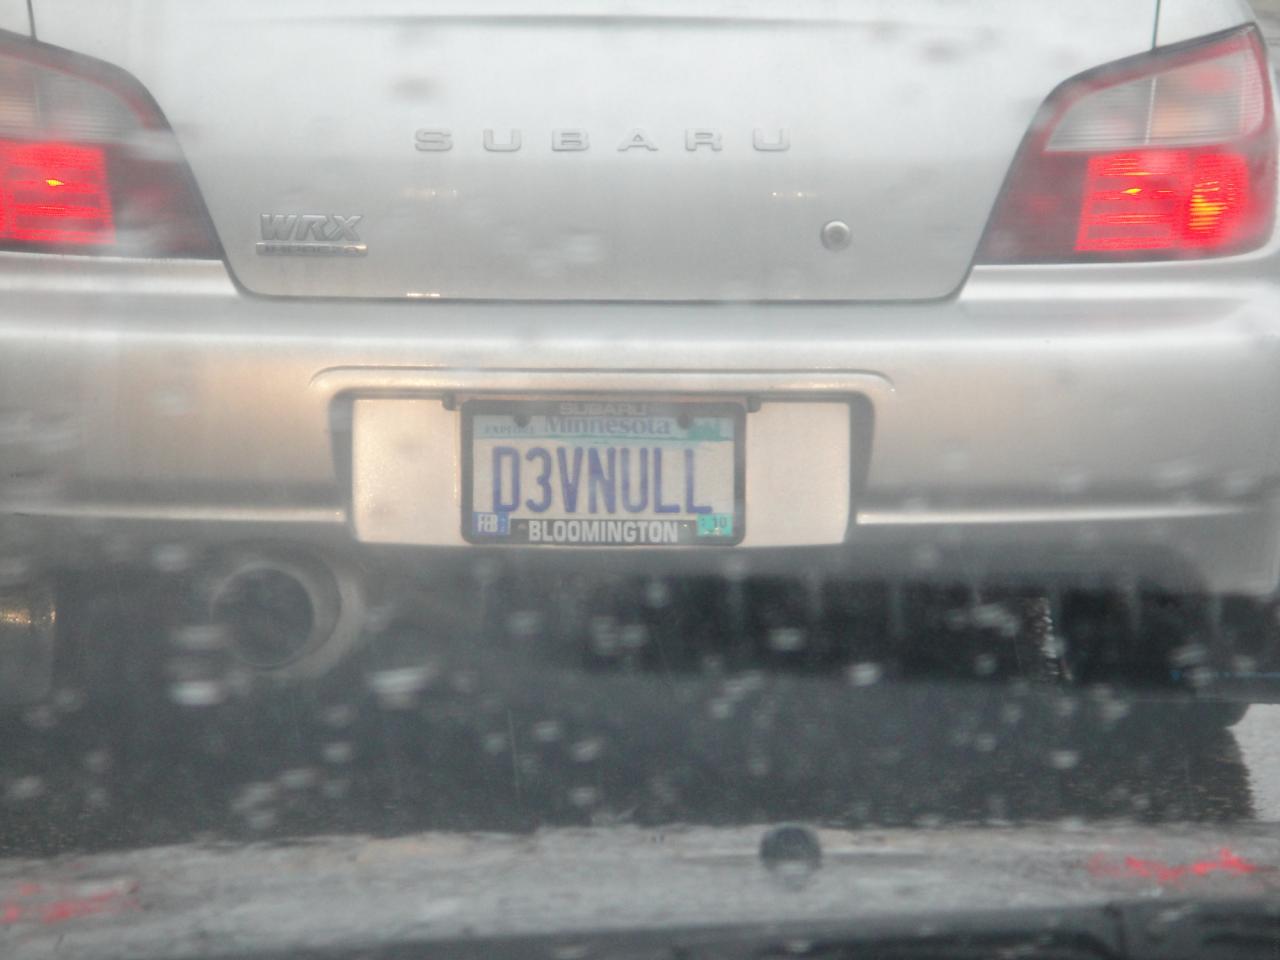 D3vNull License Plate for Hackers